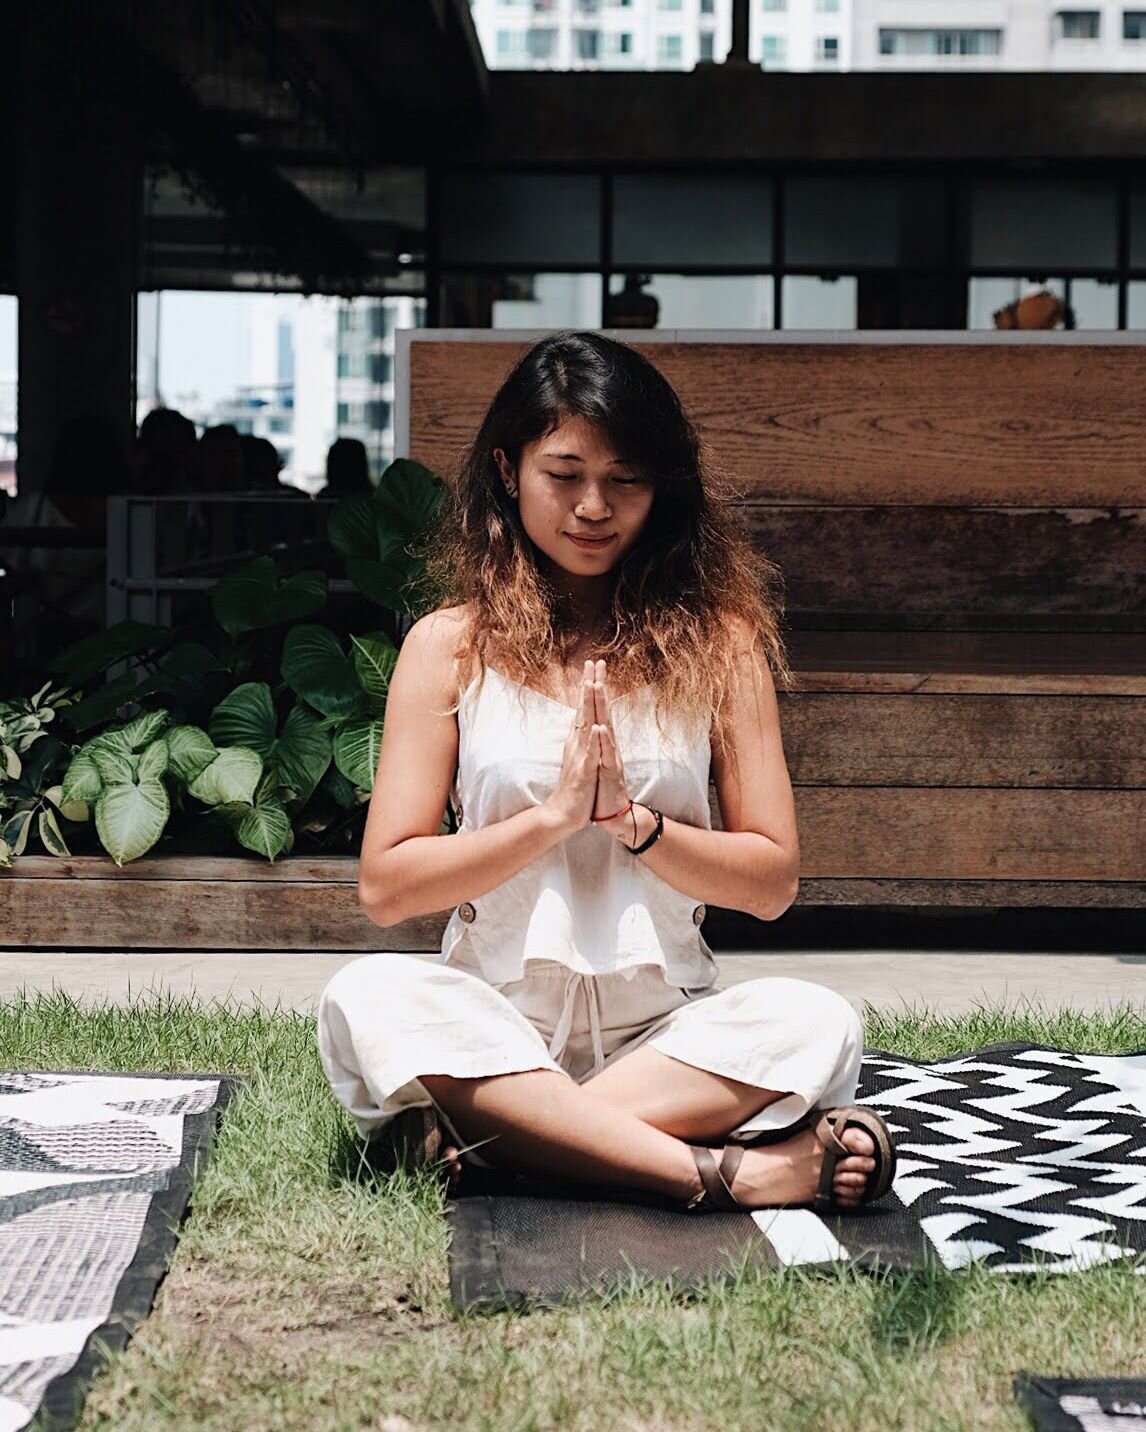 On Tuesday, March 19th at 11.00am we&rsquo;ll be hosting our second LinkedIn Audio event as part of our series on the topic of Creative Health. And, this time, we&rsquo;re inviting guest speaker Wen Yee Kok, a yoga and creative practitioner, to run s